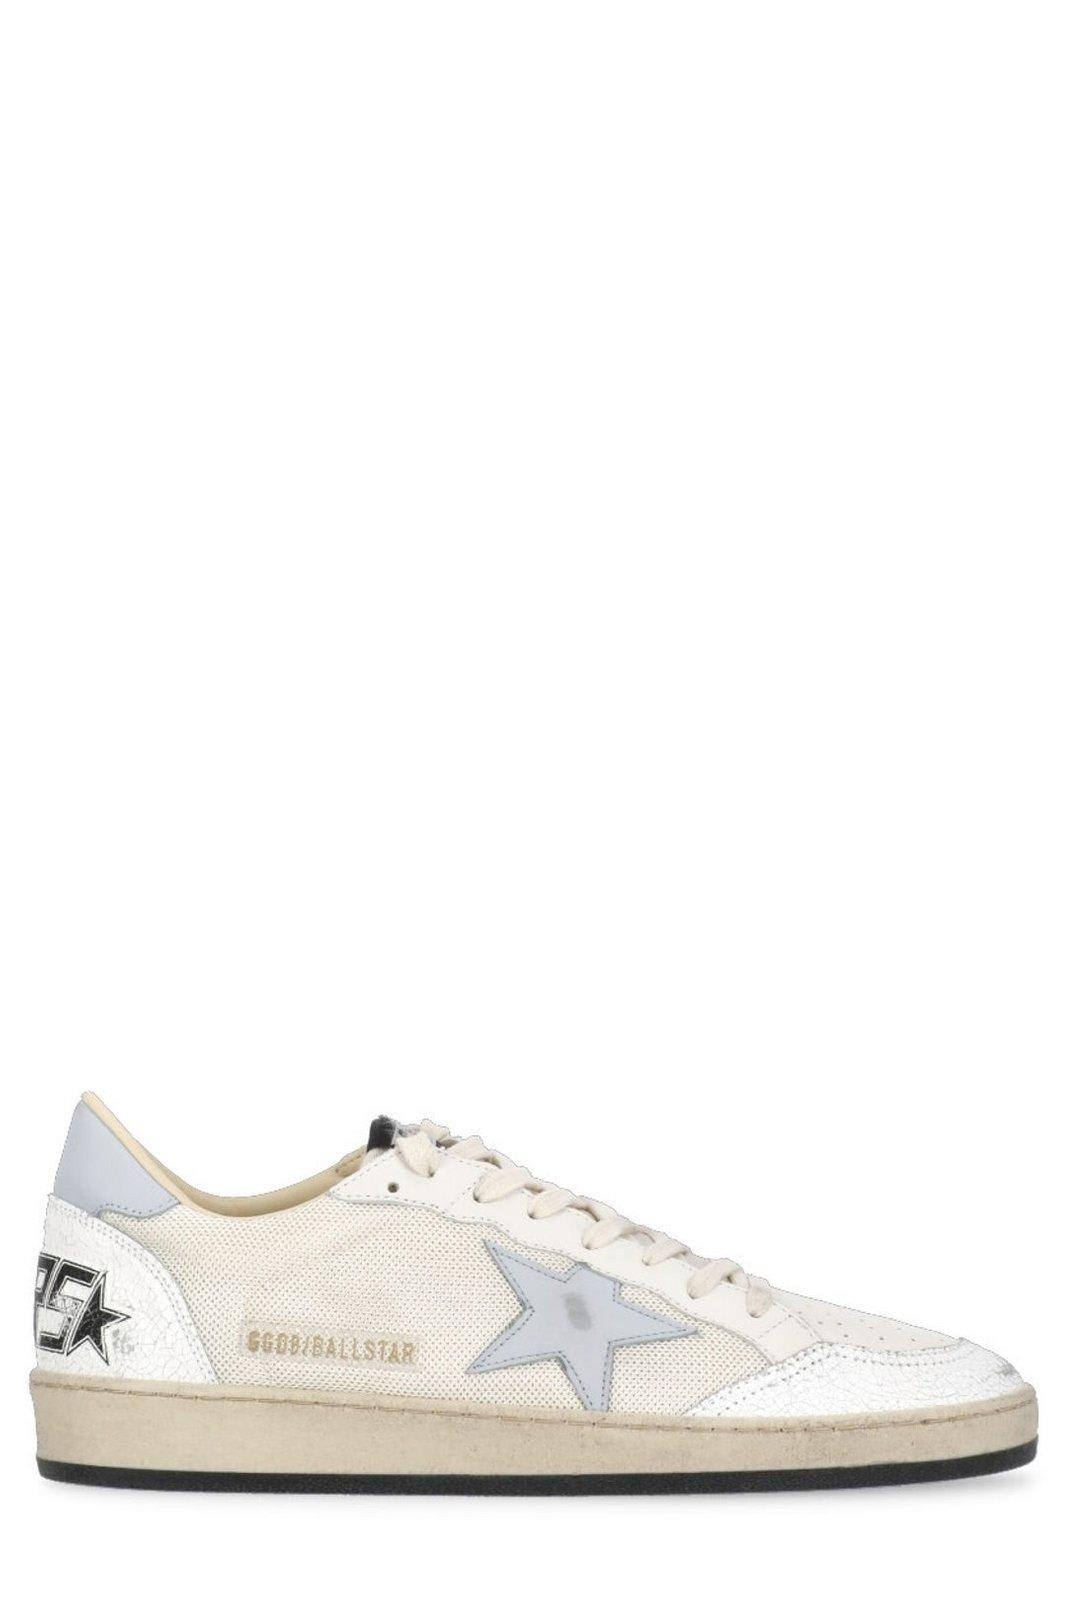 Golden Goose Star Patch Lace-up Trainers In White/cream/gray